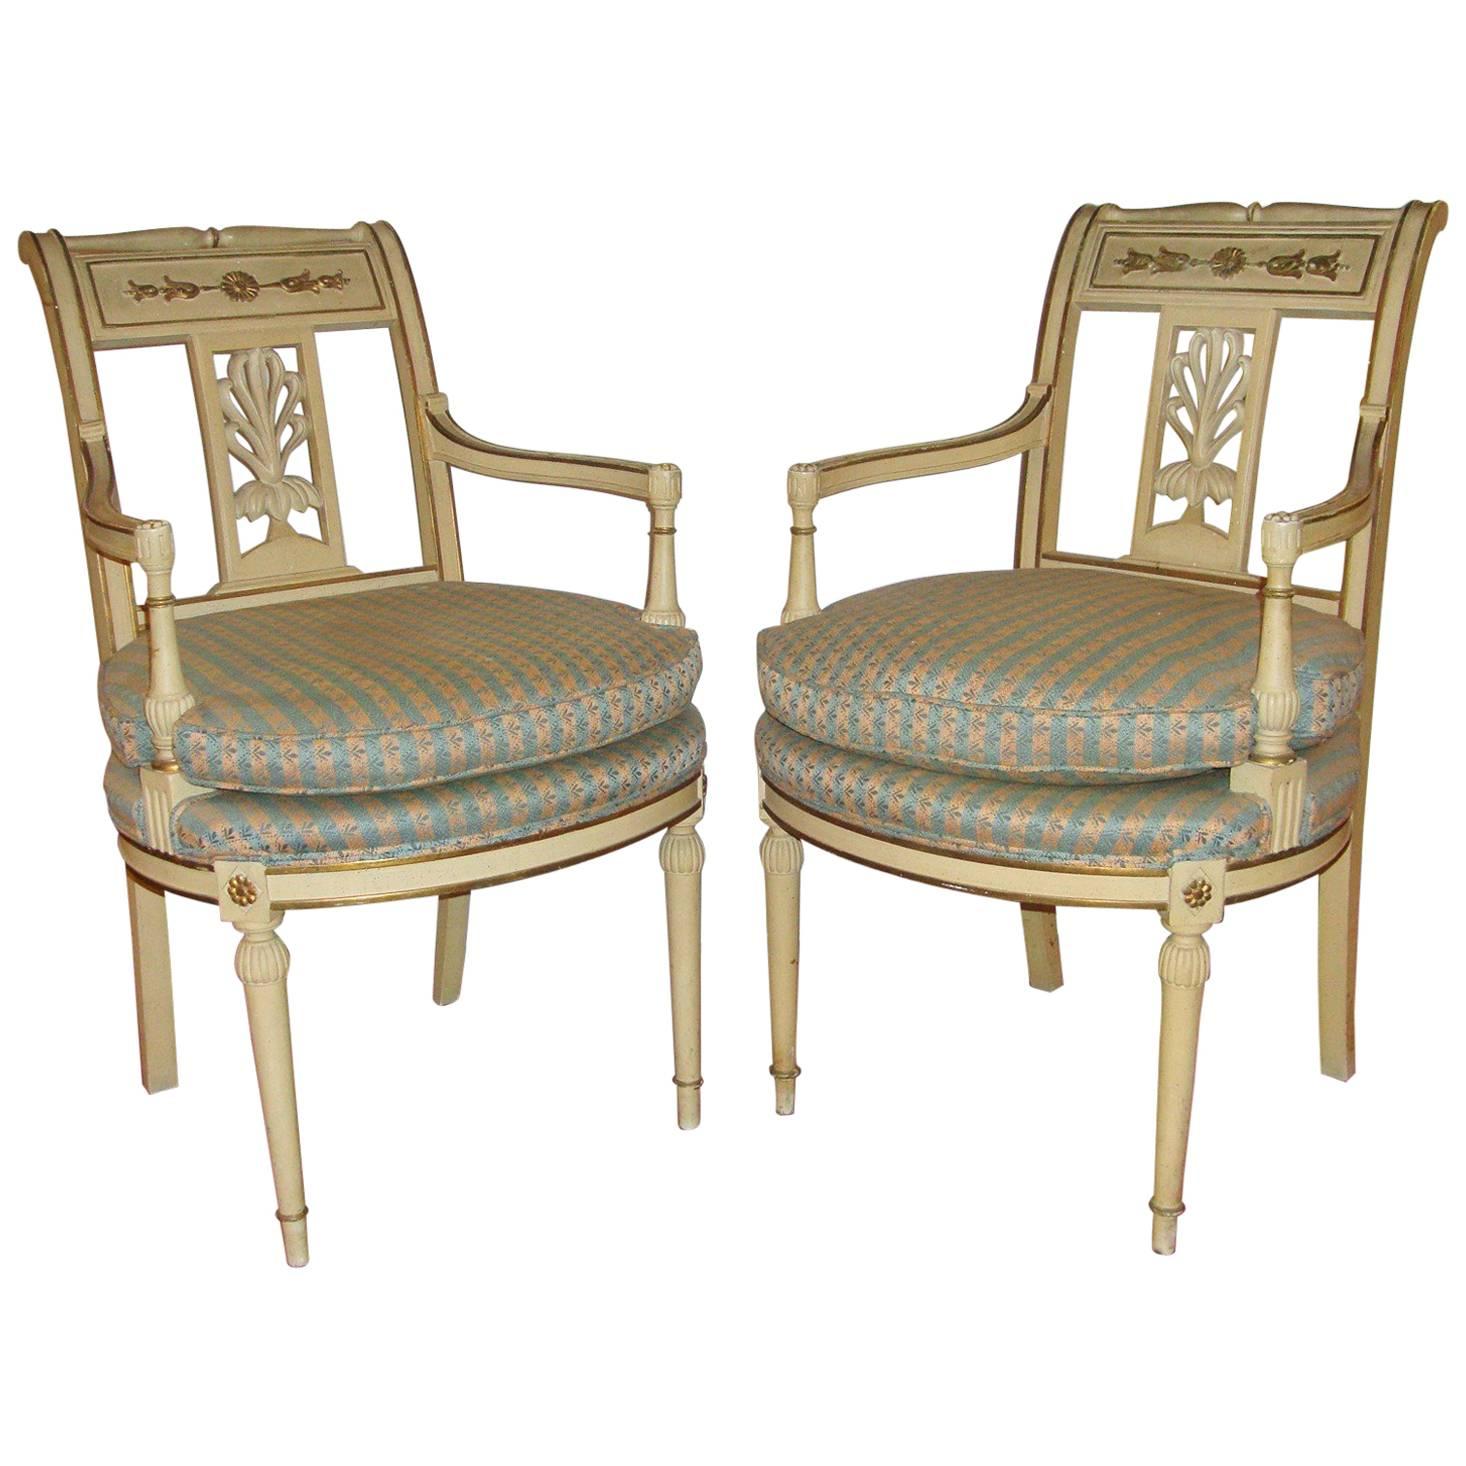 Pair of Empire Style Creme Paint Chairs